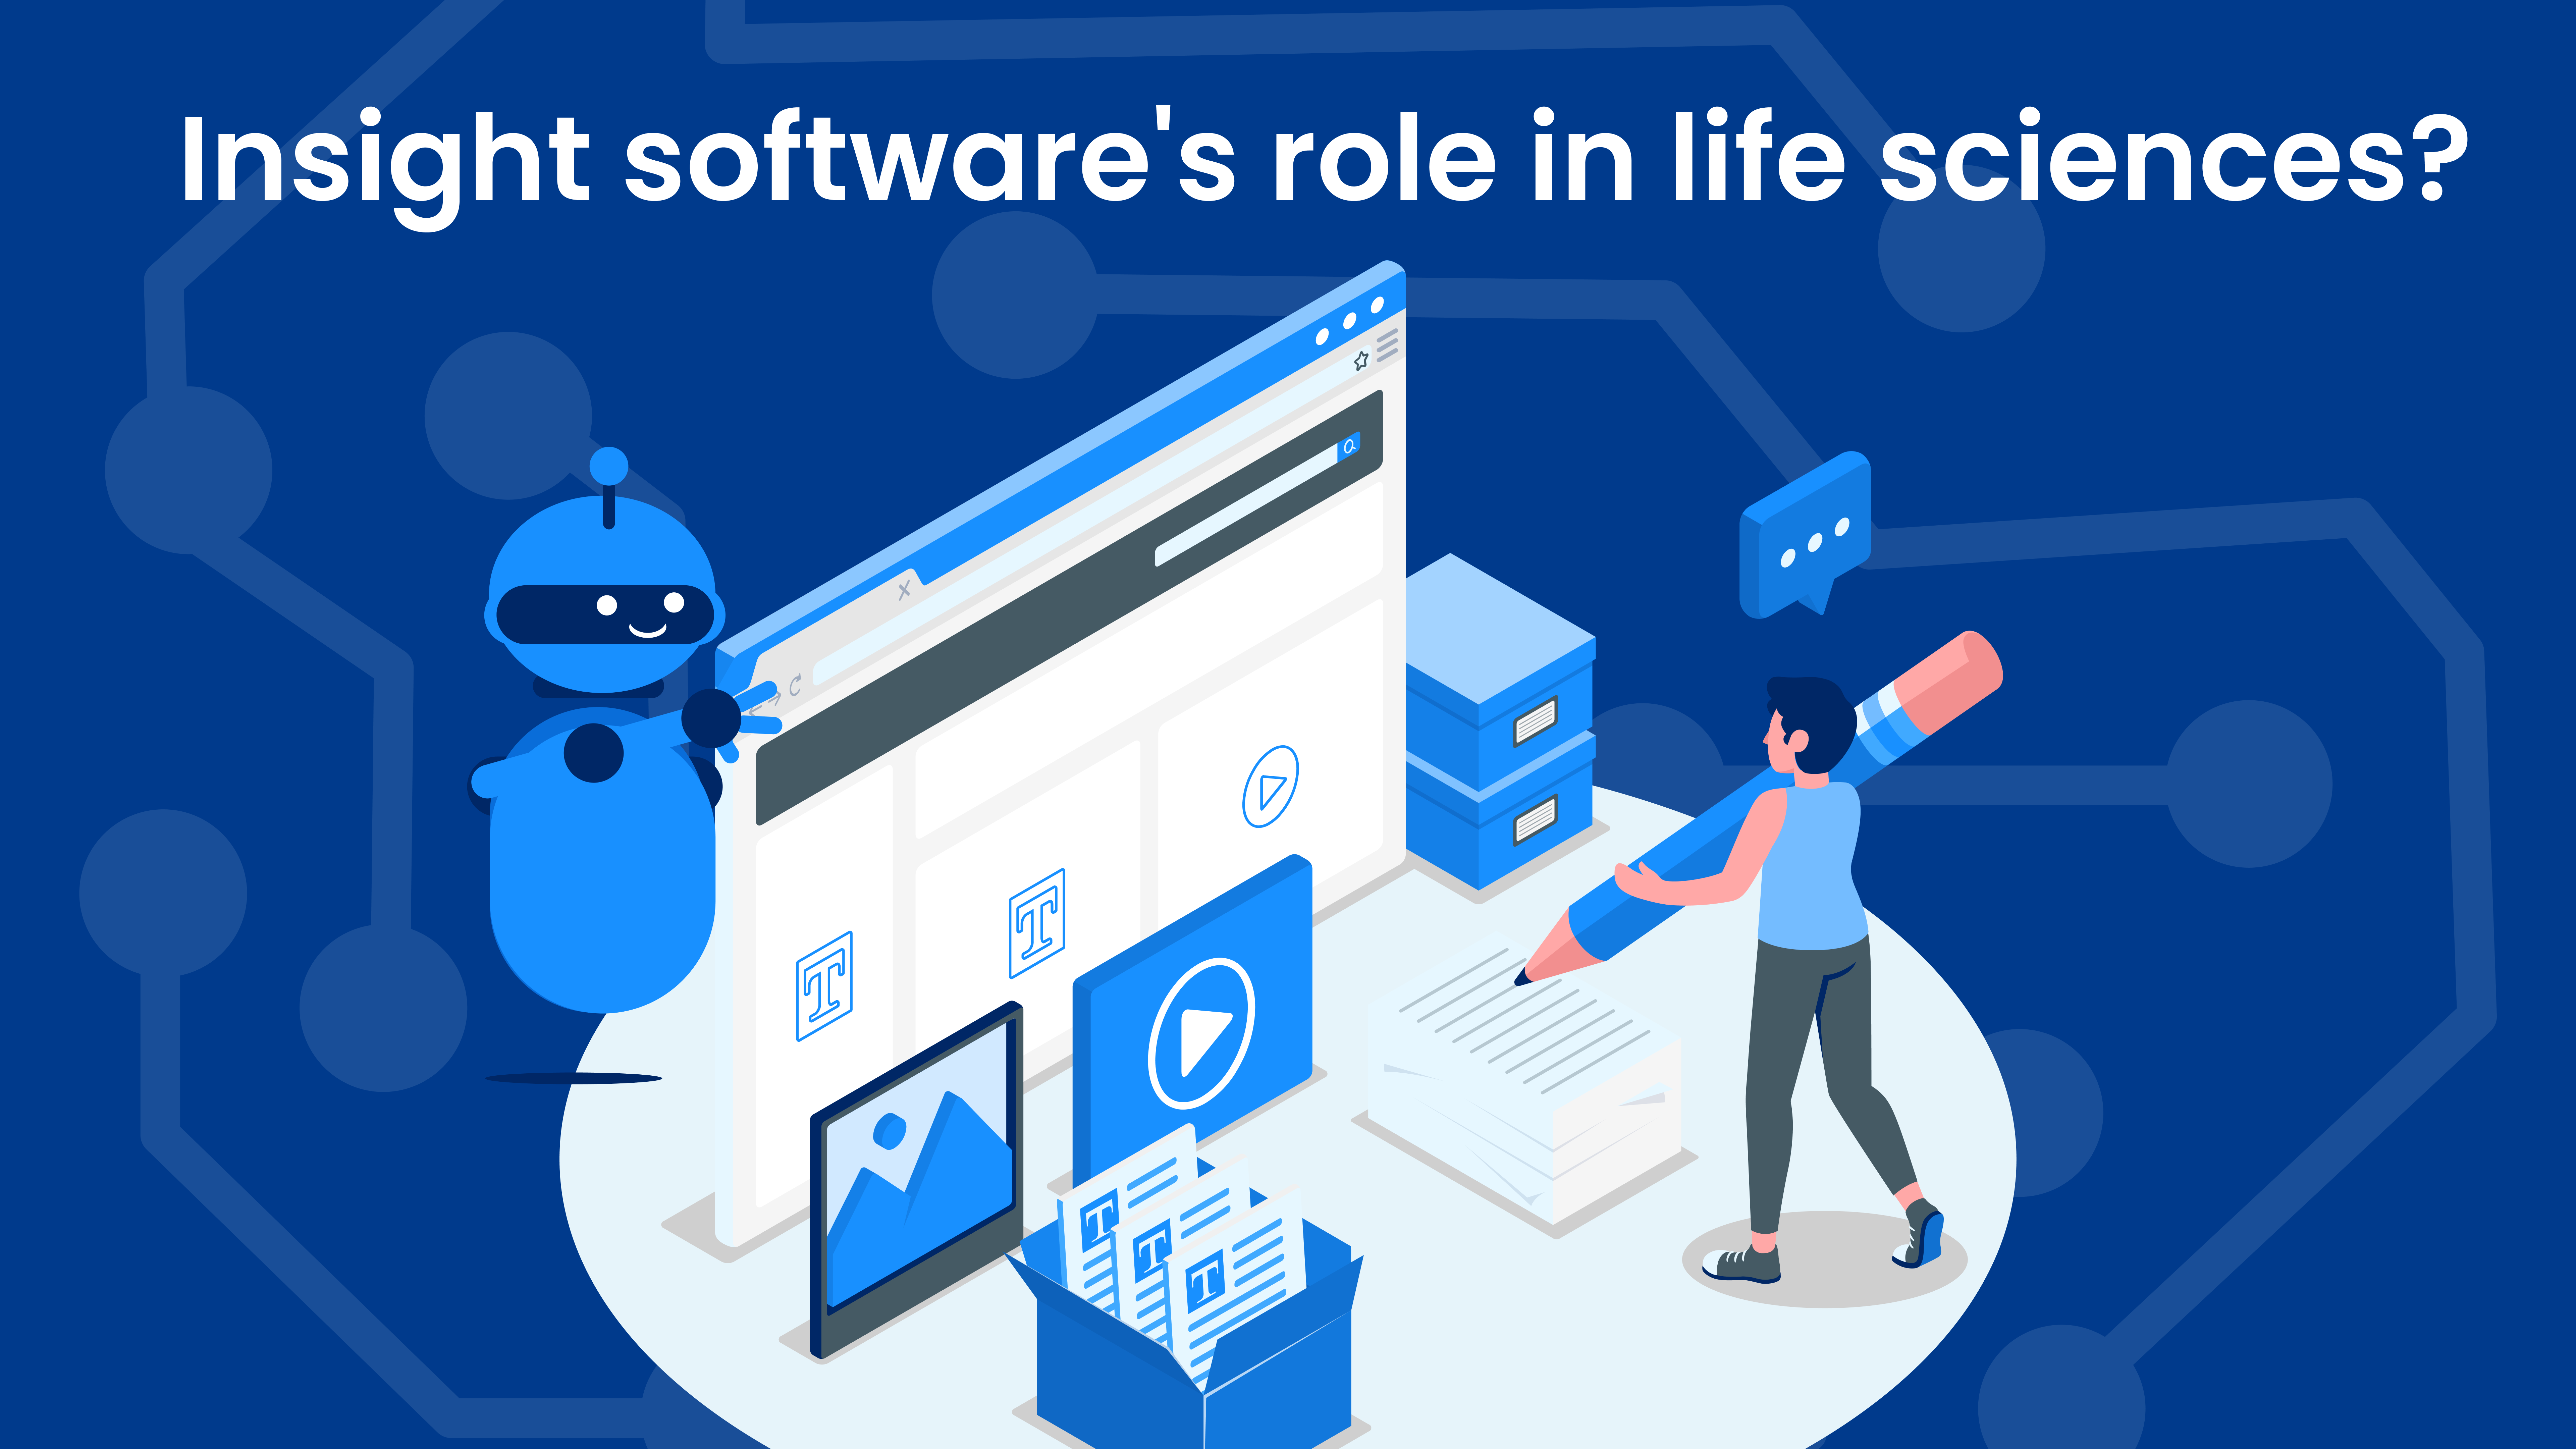 What is insight management software, and why is it important to the life sciences sector?